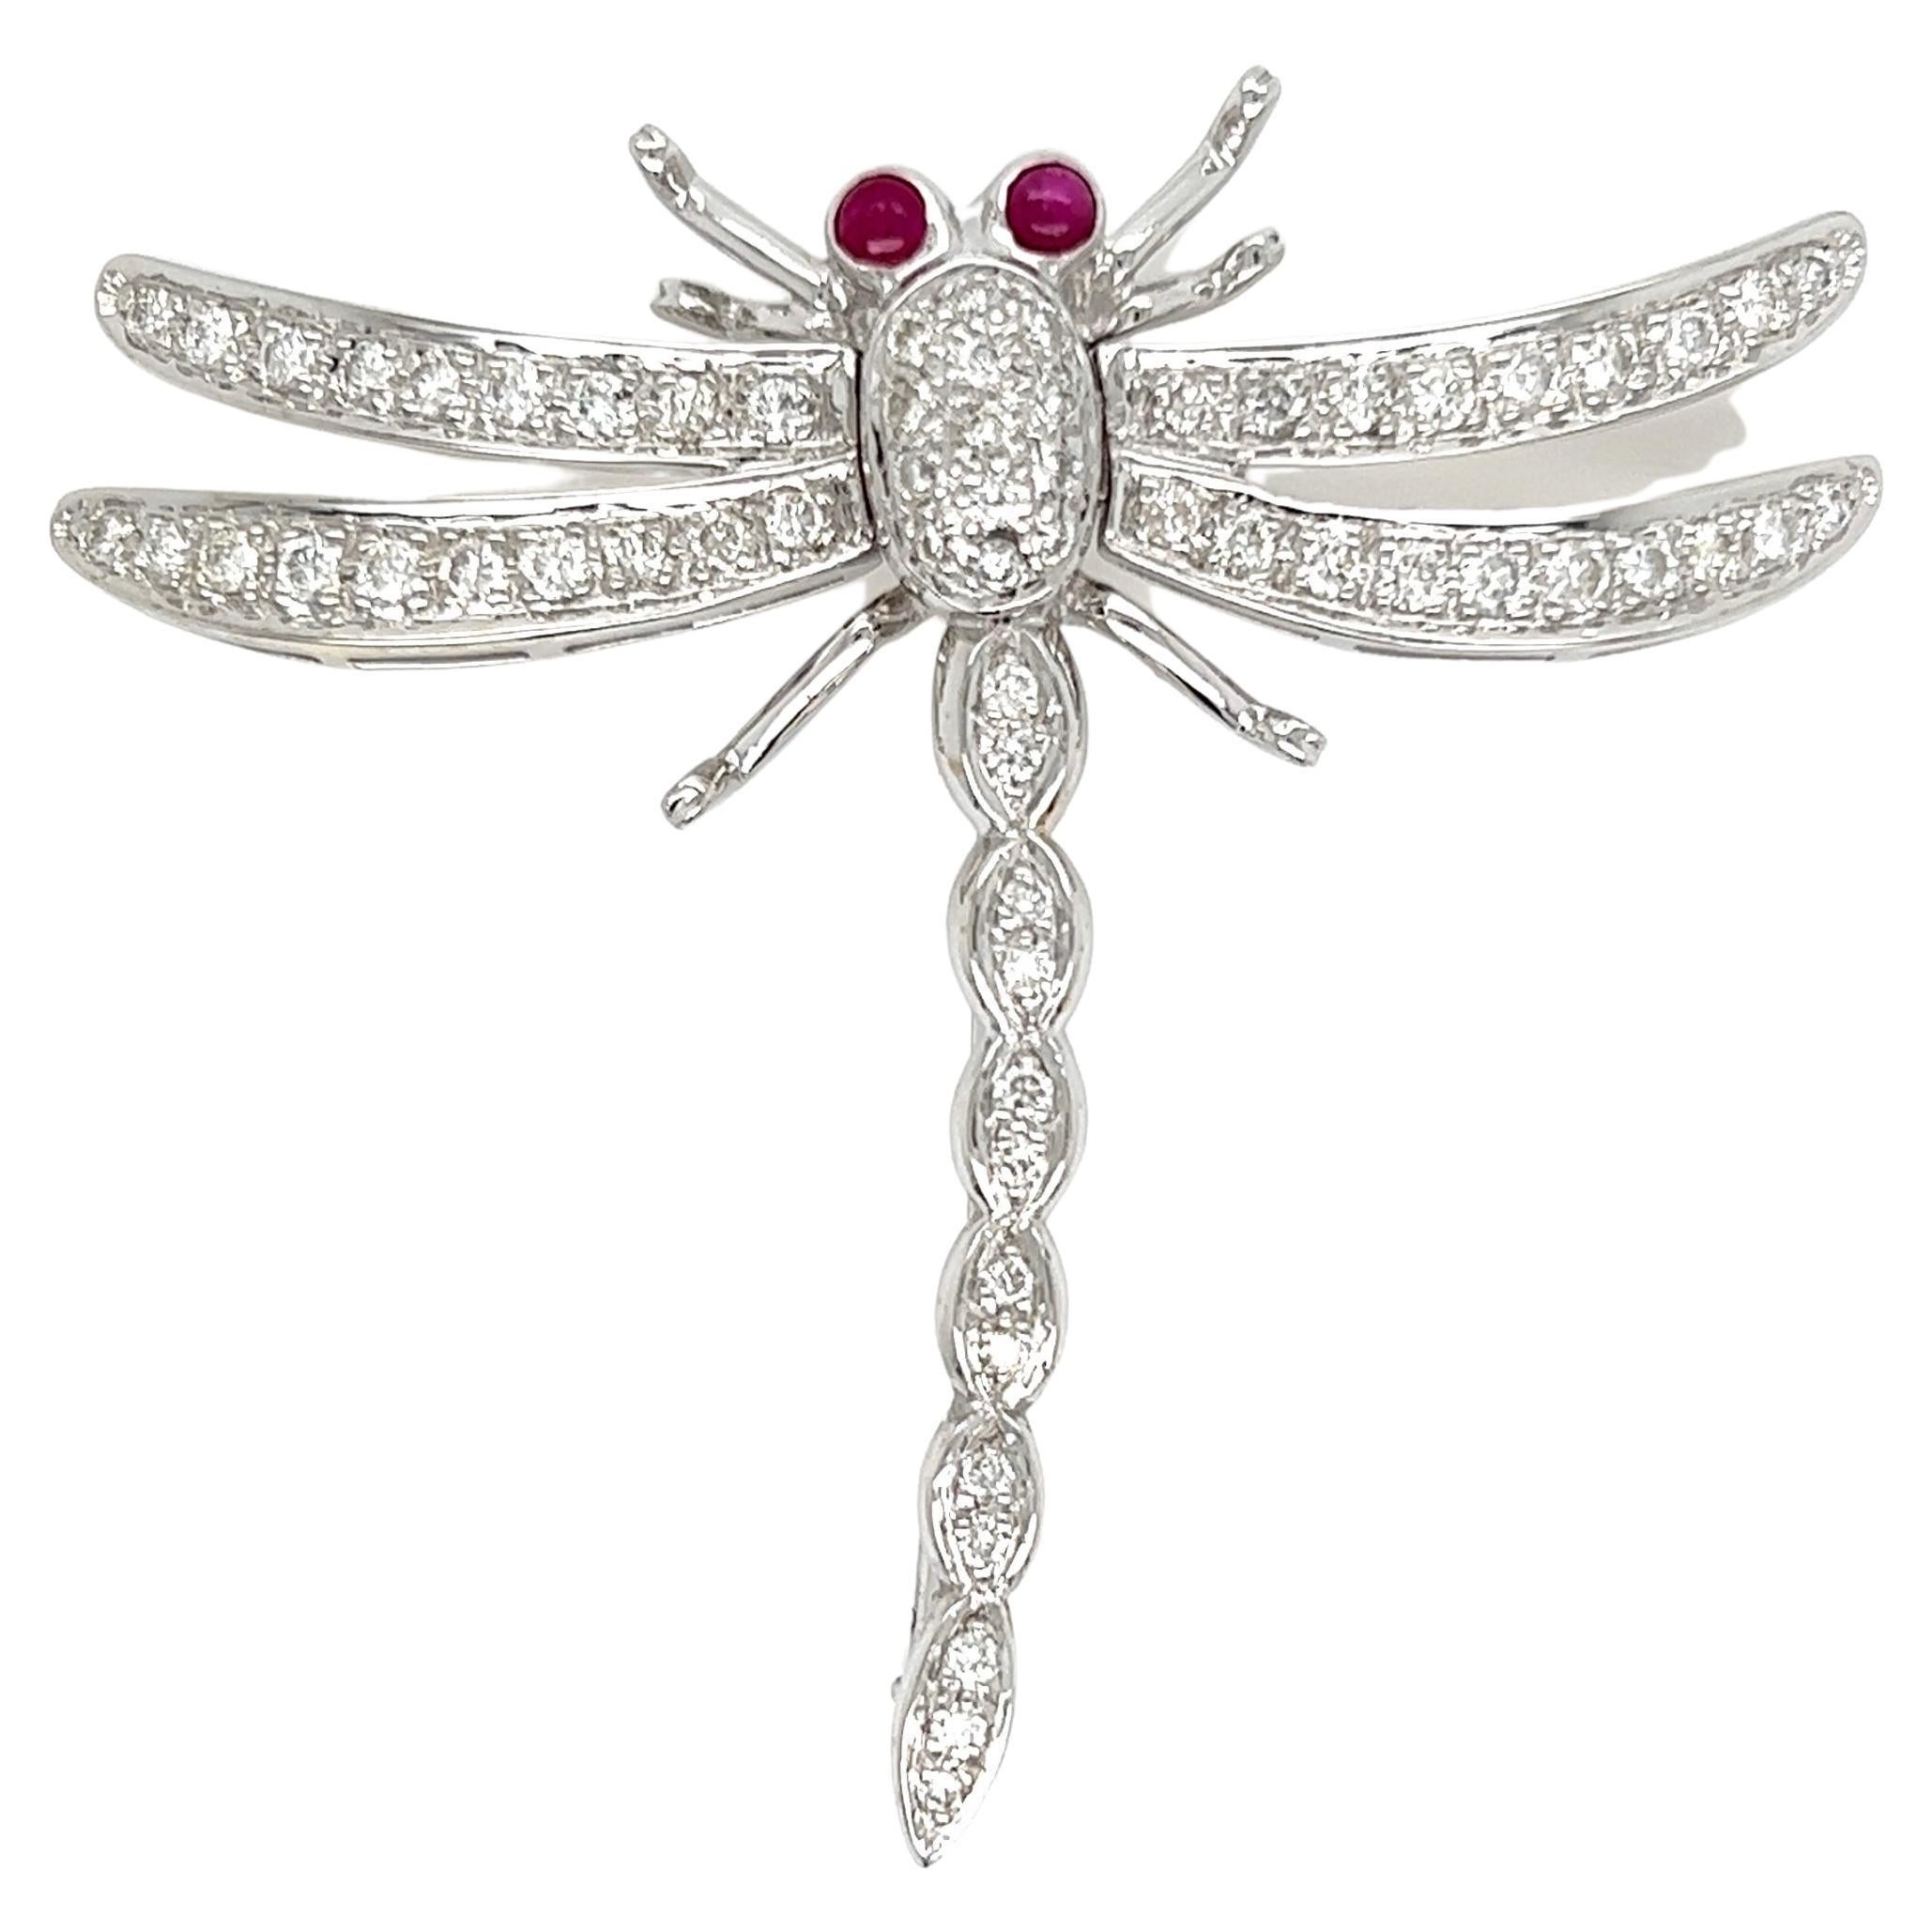 Diamond and Ruby Dragonfly Gold Brooch Pin Estate Fine Jewelry